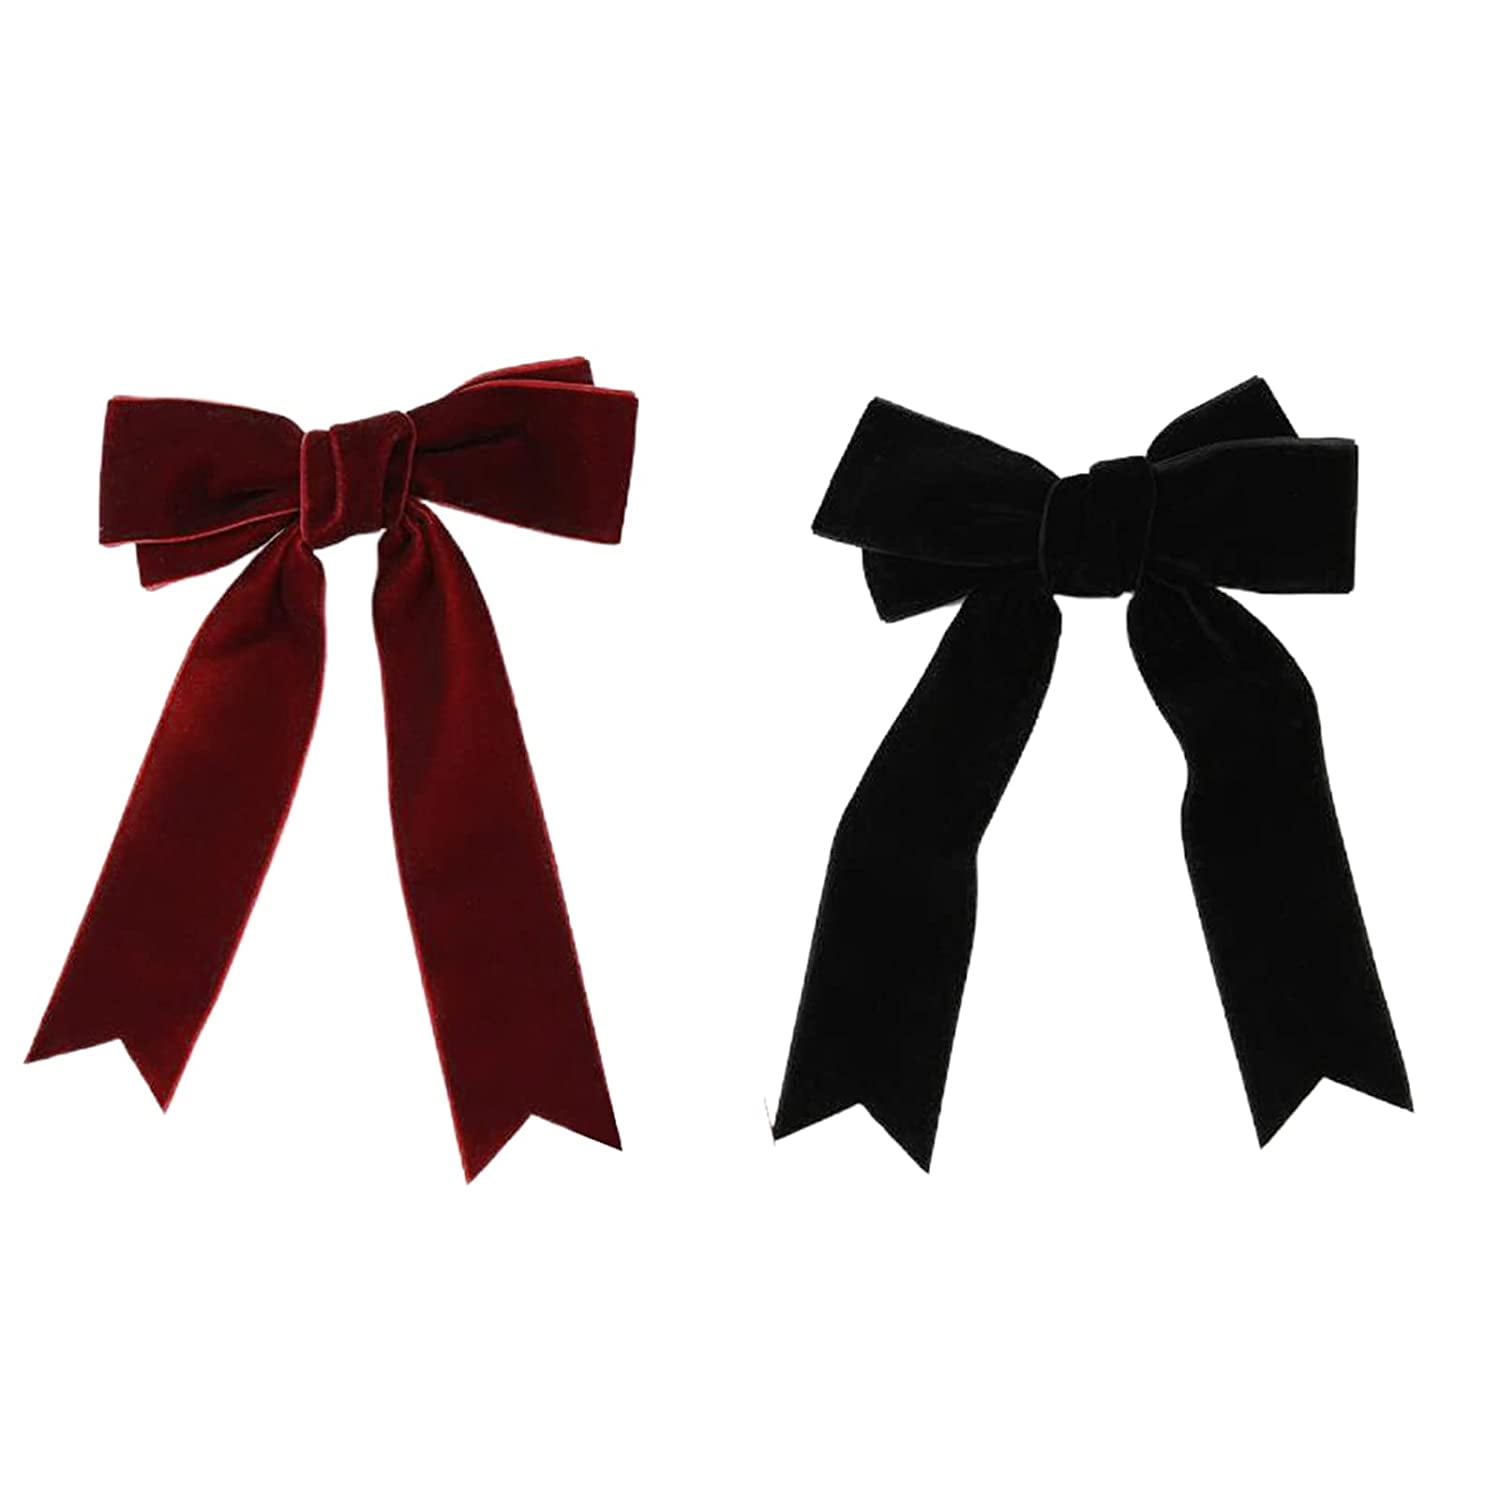 NOGIS Hair Ties Hair Bows, Bow Clip Velvet Satin Ribbon Bows Craft Bows  Large Hair Bow Clips for women and Girls, Hair Bows with French Hair Clips  Hair Accessories, 5.5 2 PCS (Red and Black) 